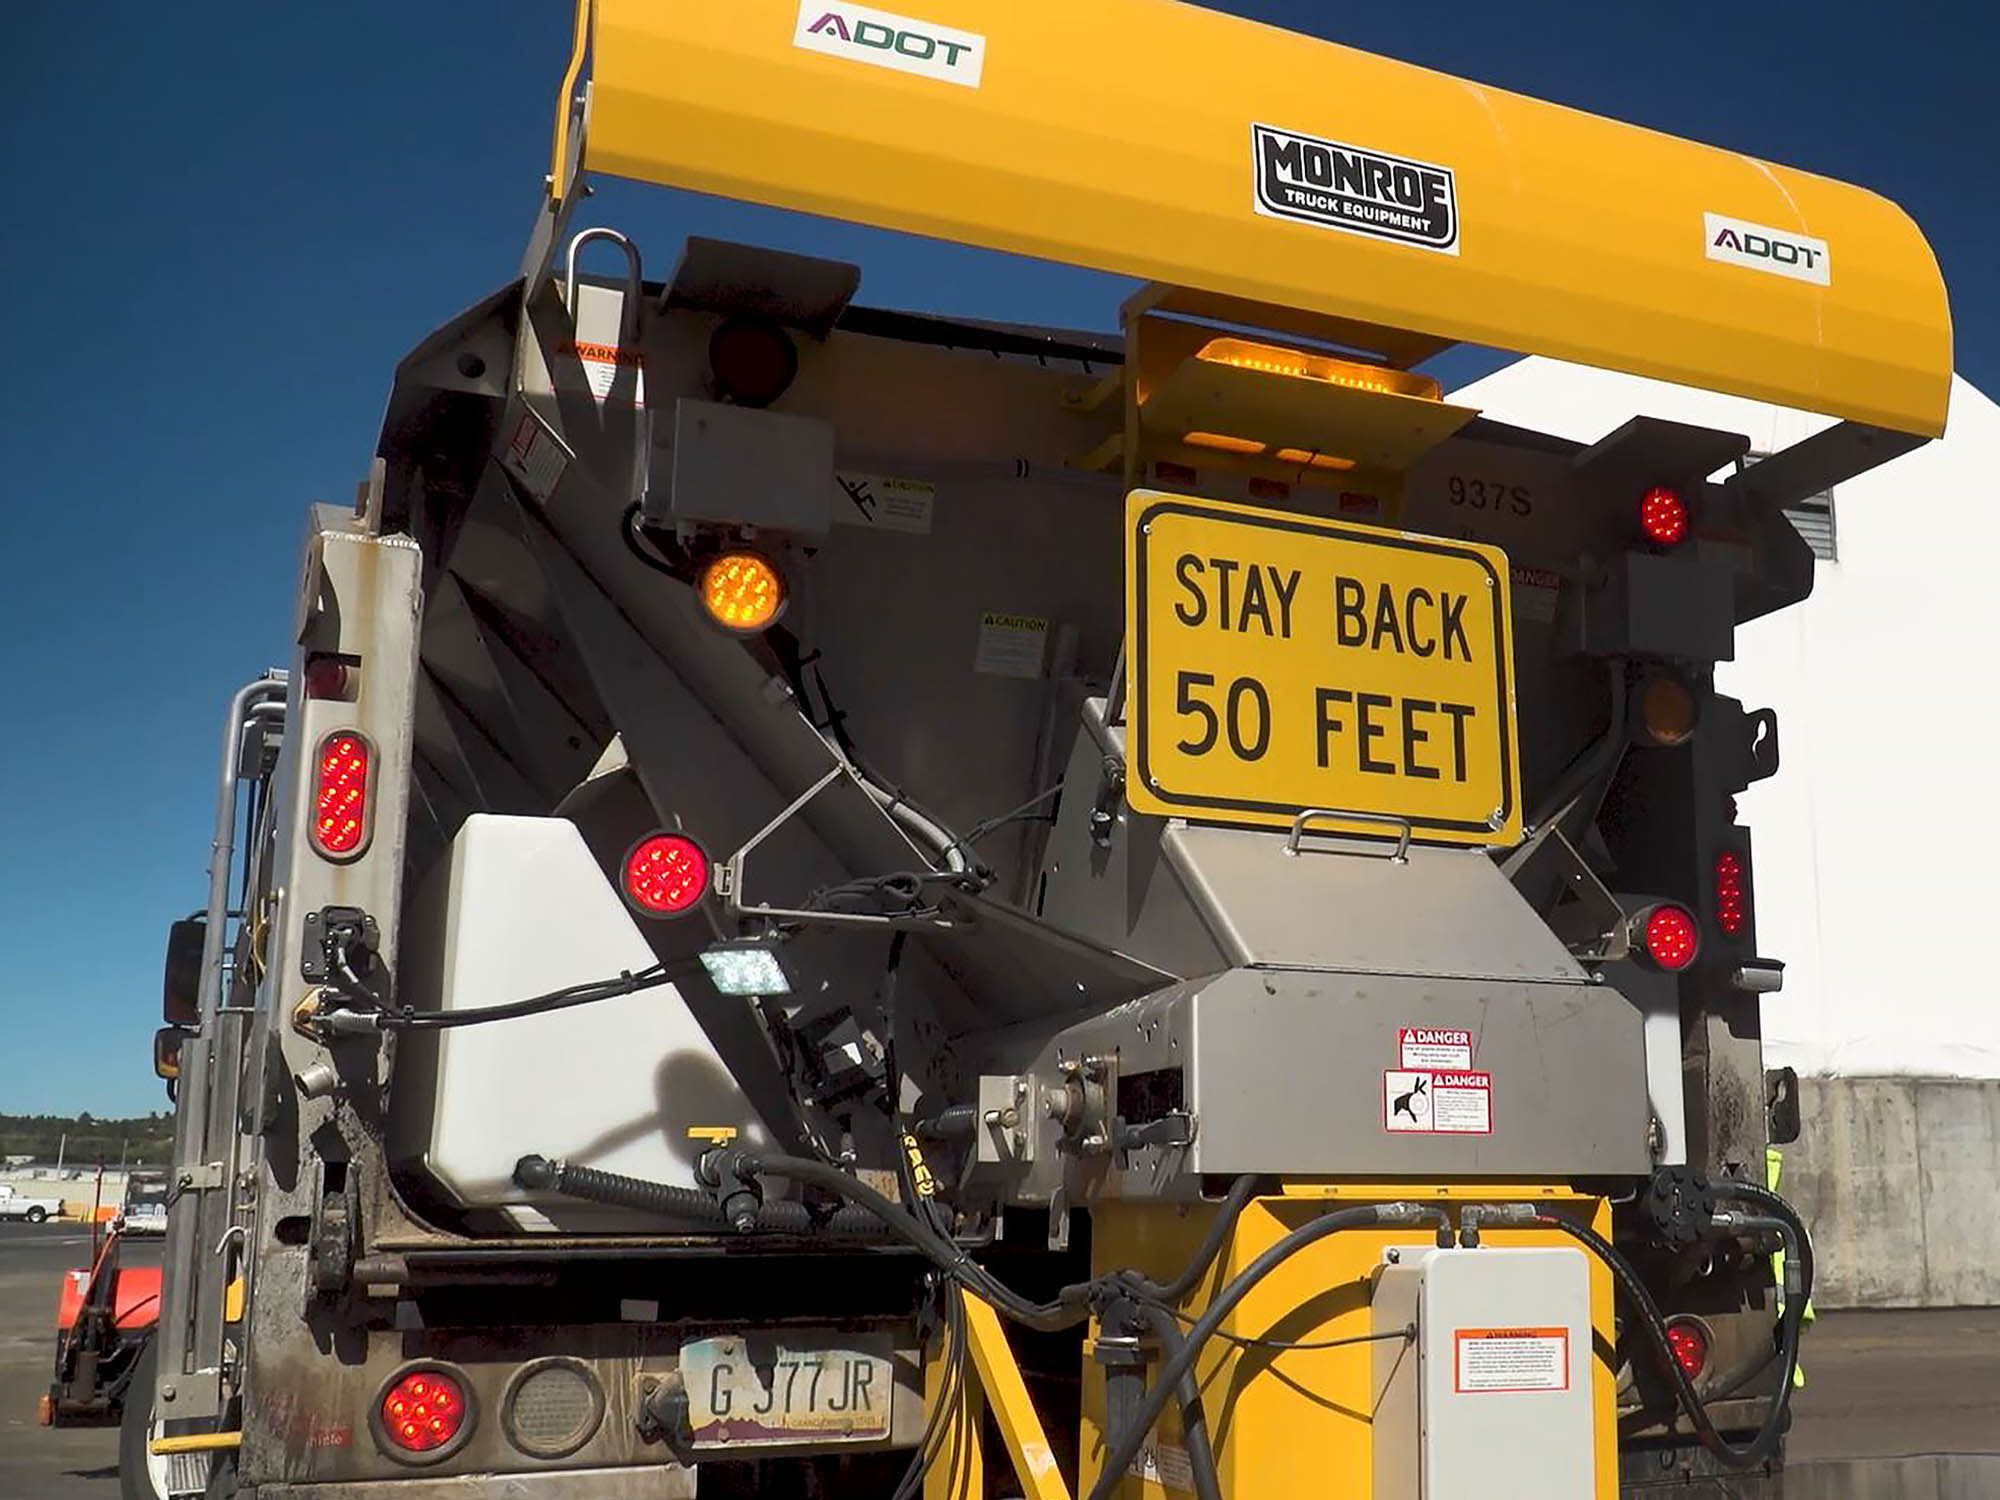 Snowplow is readied for winter - deicing equipment (ADOT file photo Oct '23)